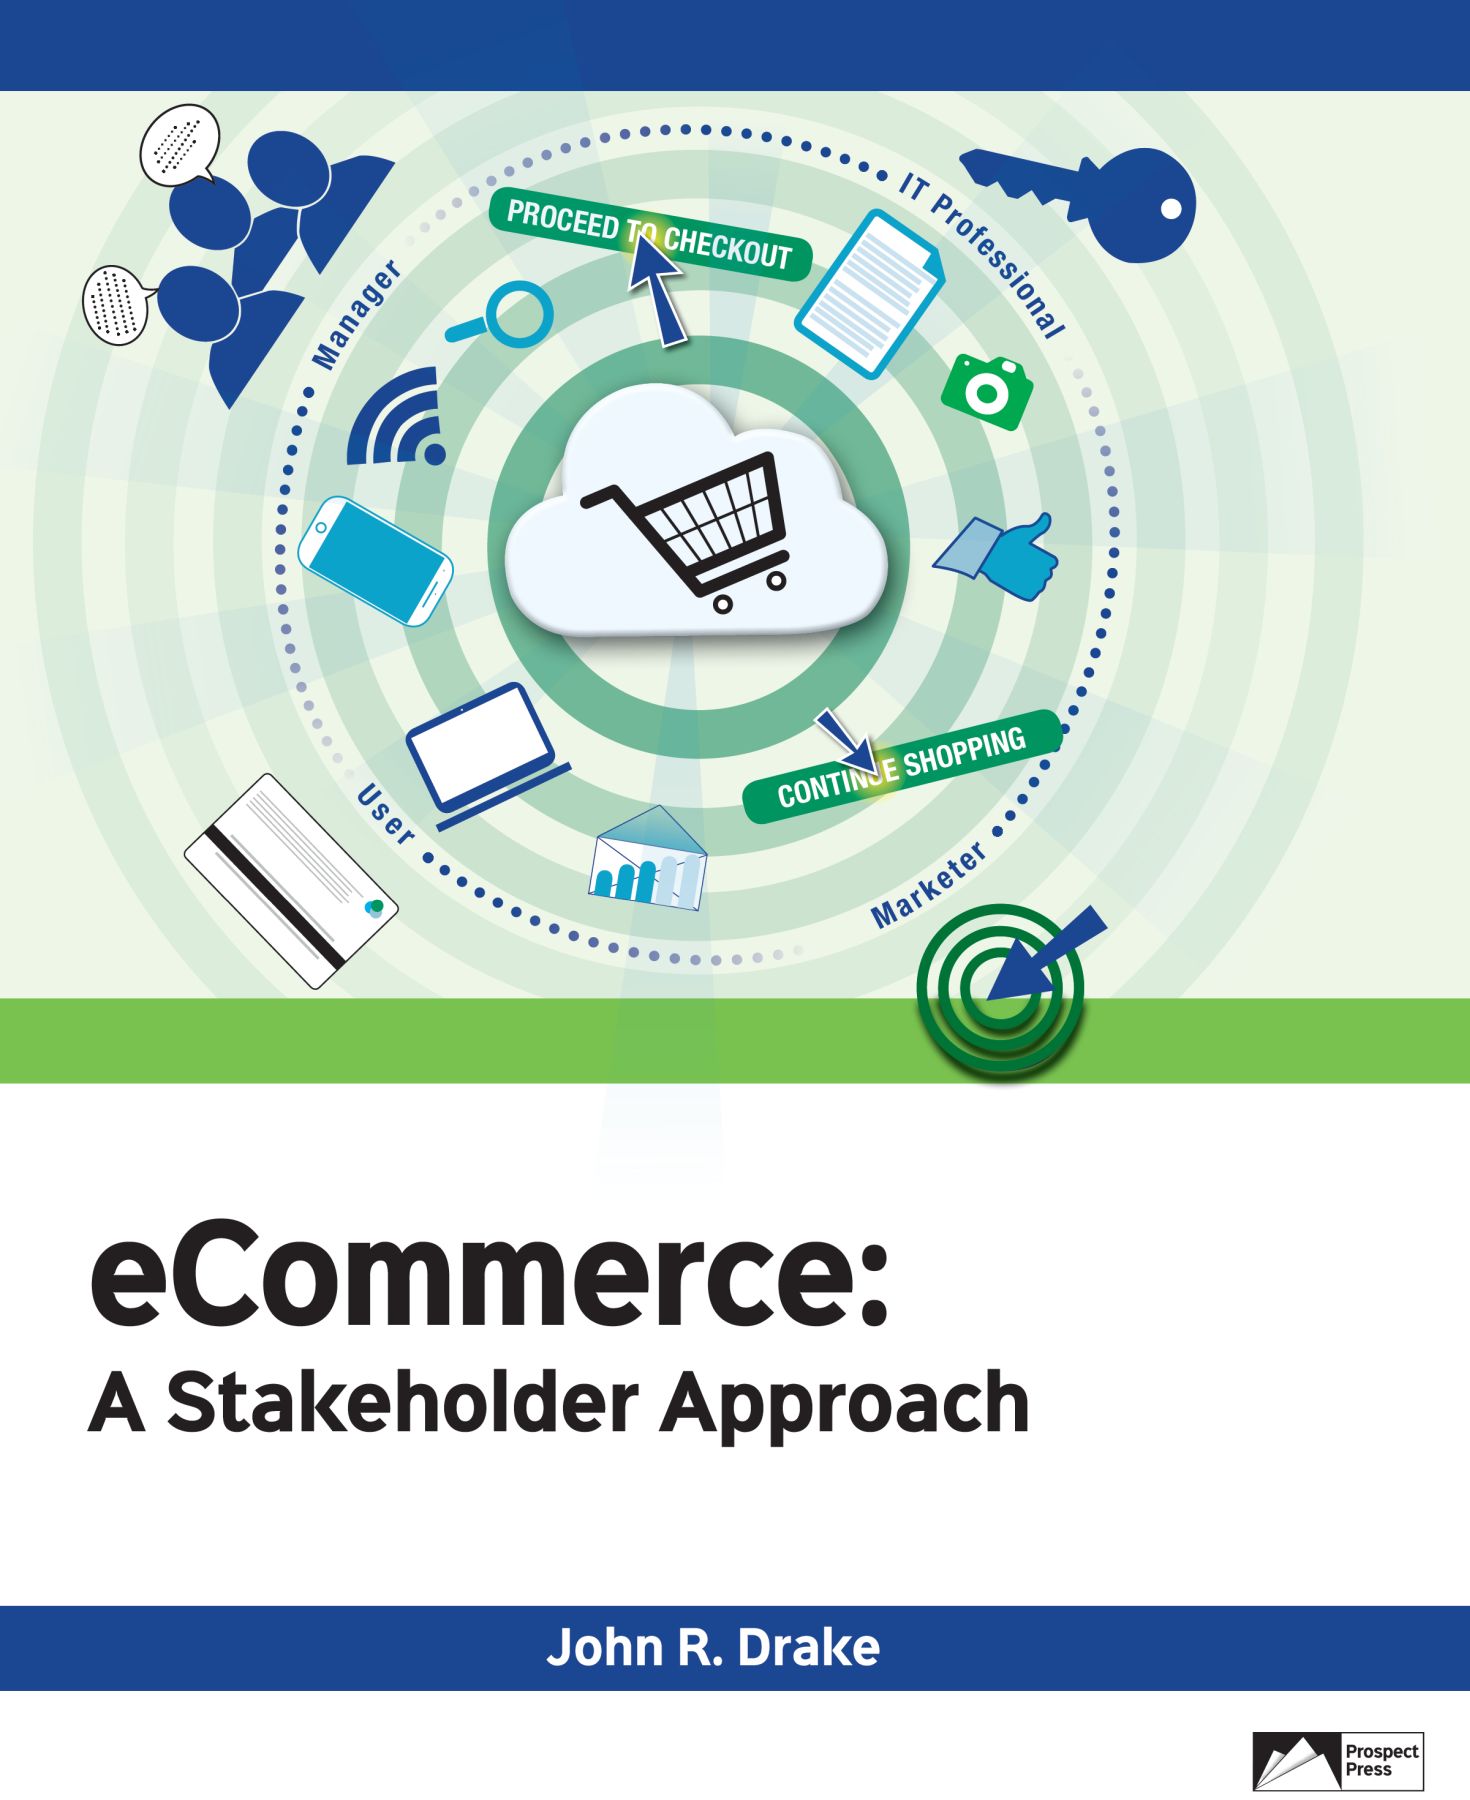 Drake: eCommerce: A Stakeholder Approach